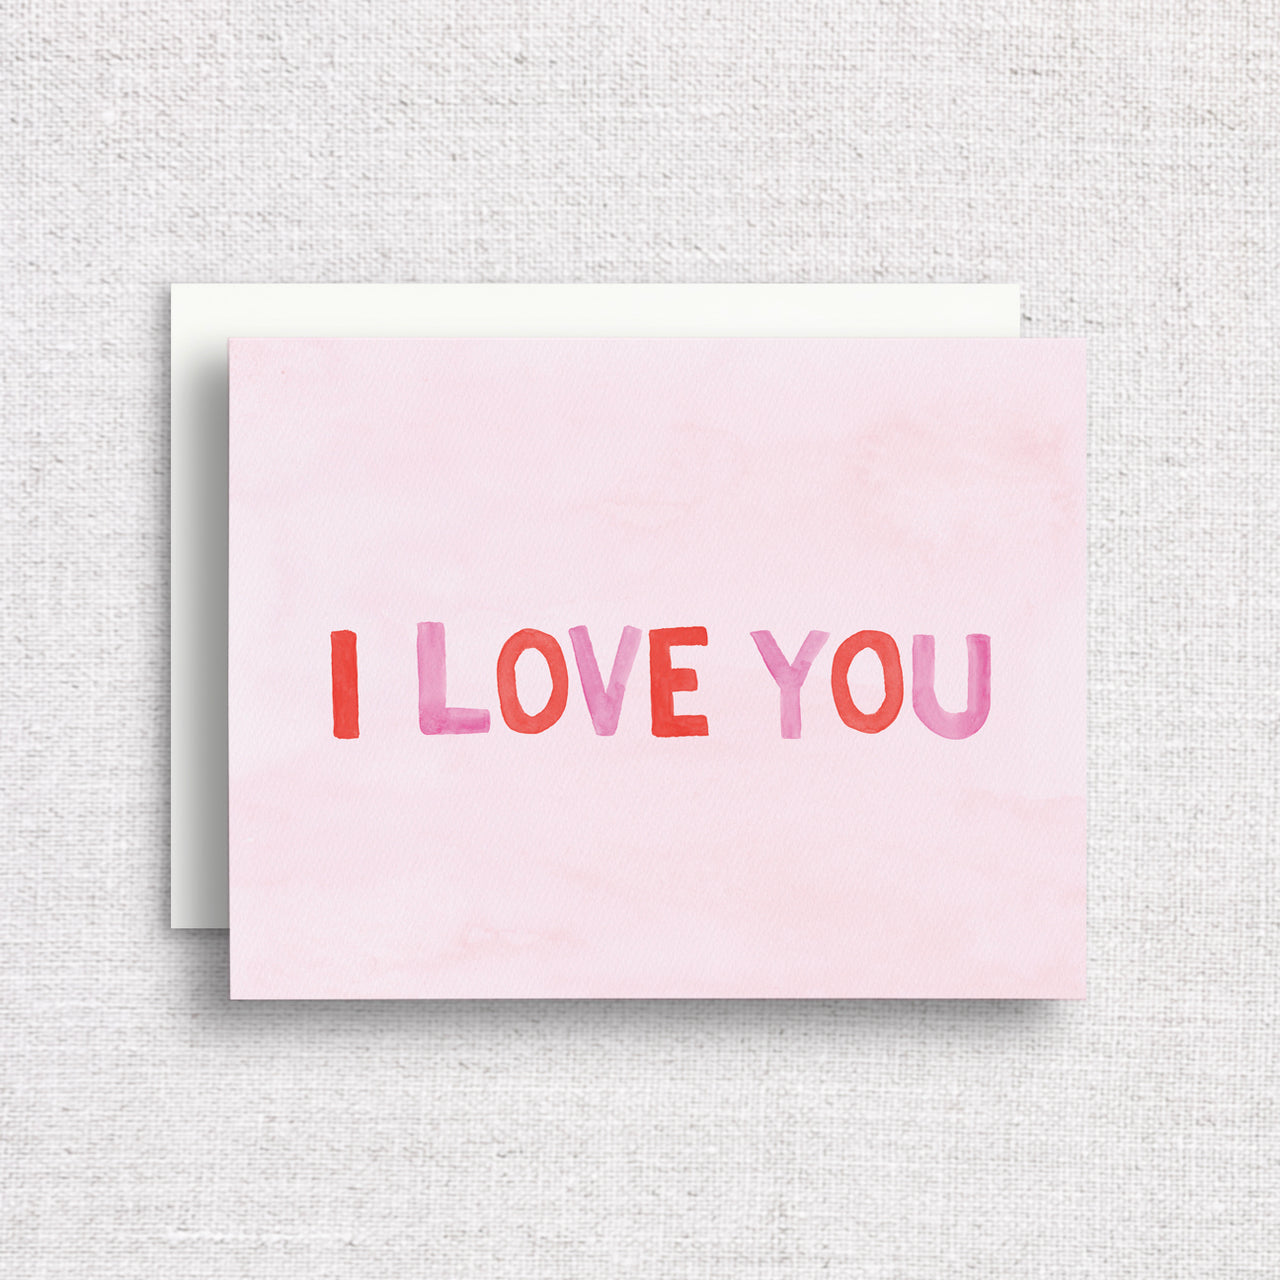 I Love You Greeting Card by Gert & Co